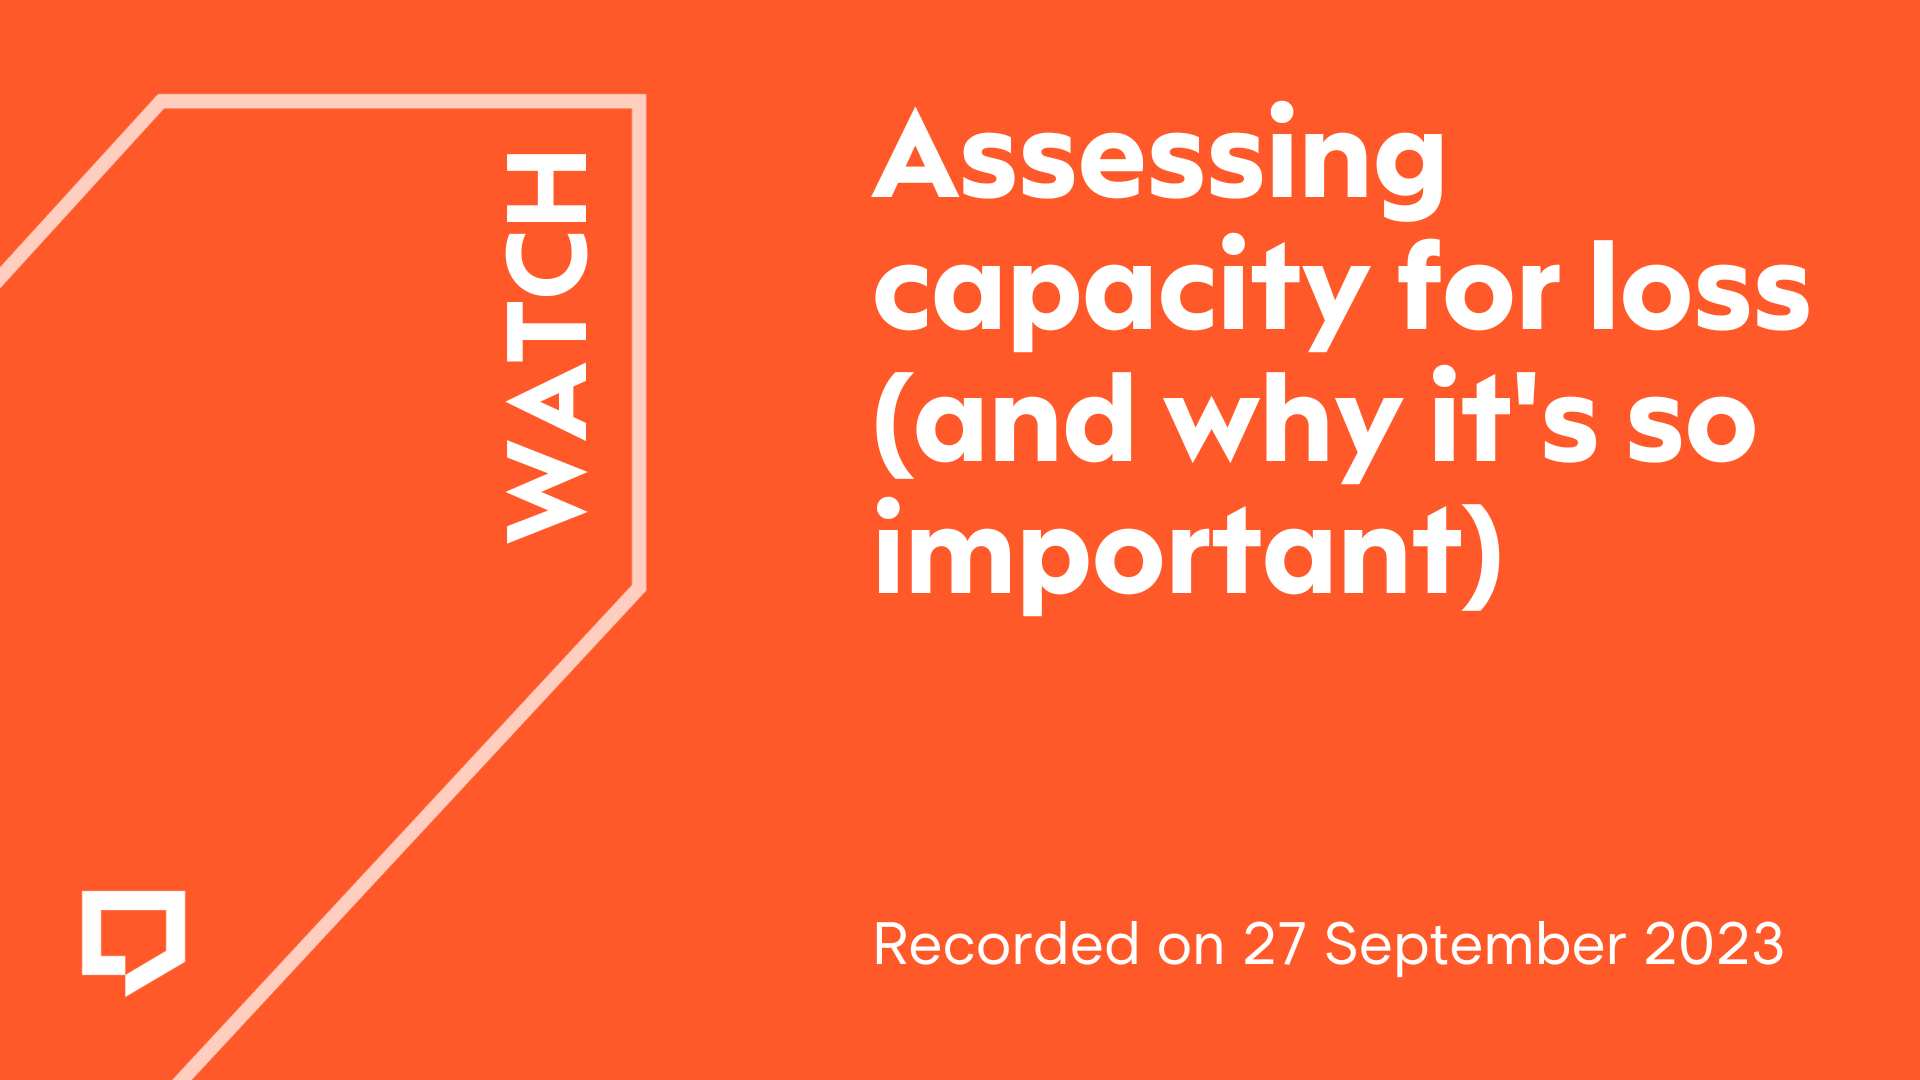 Assessing capacity for loss (and why it's so important). Recorded on 27 September 2023.